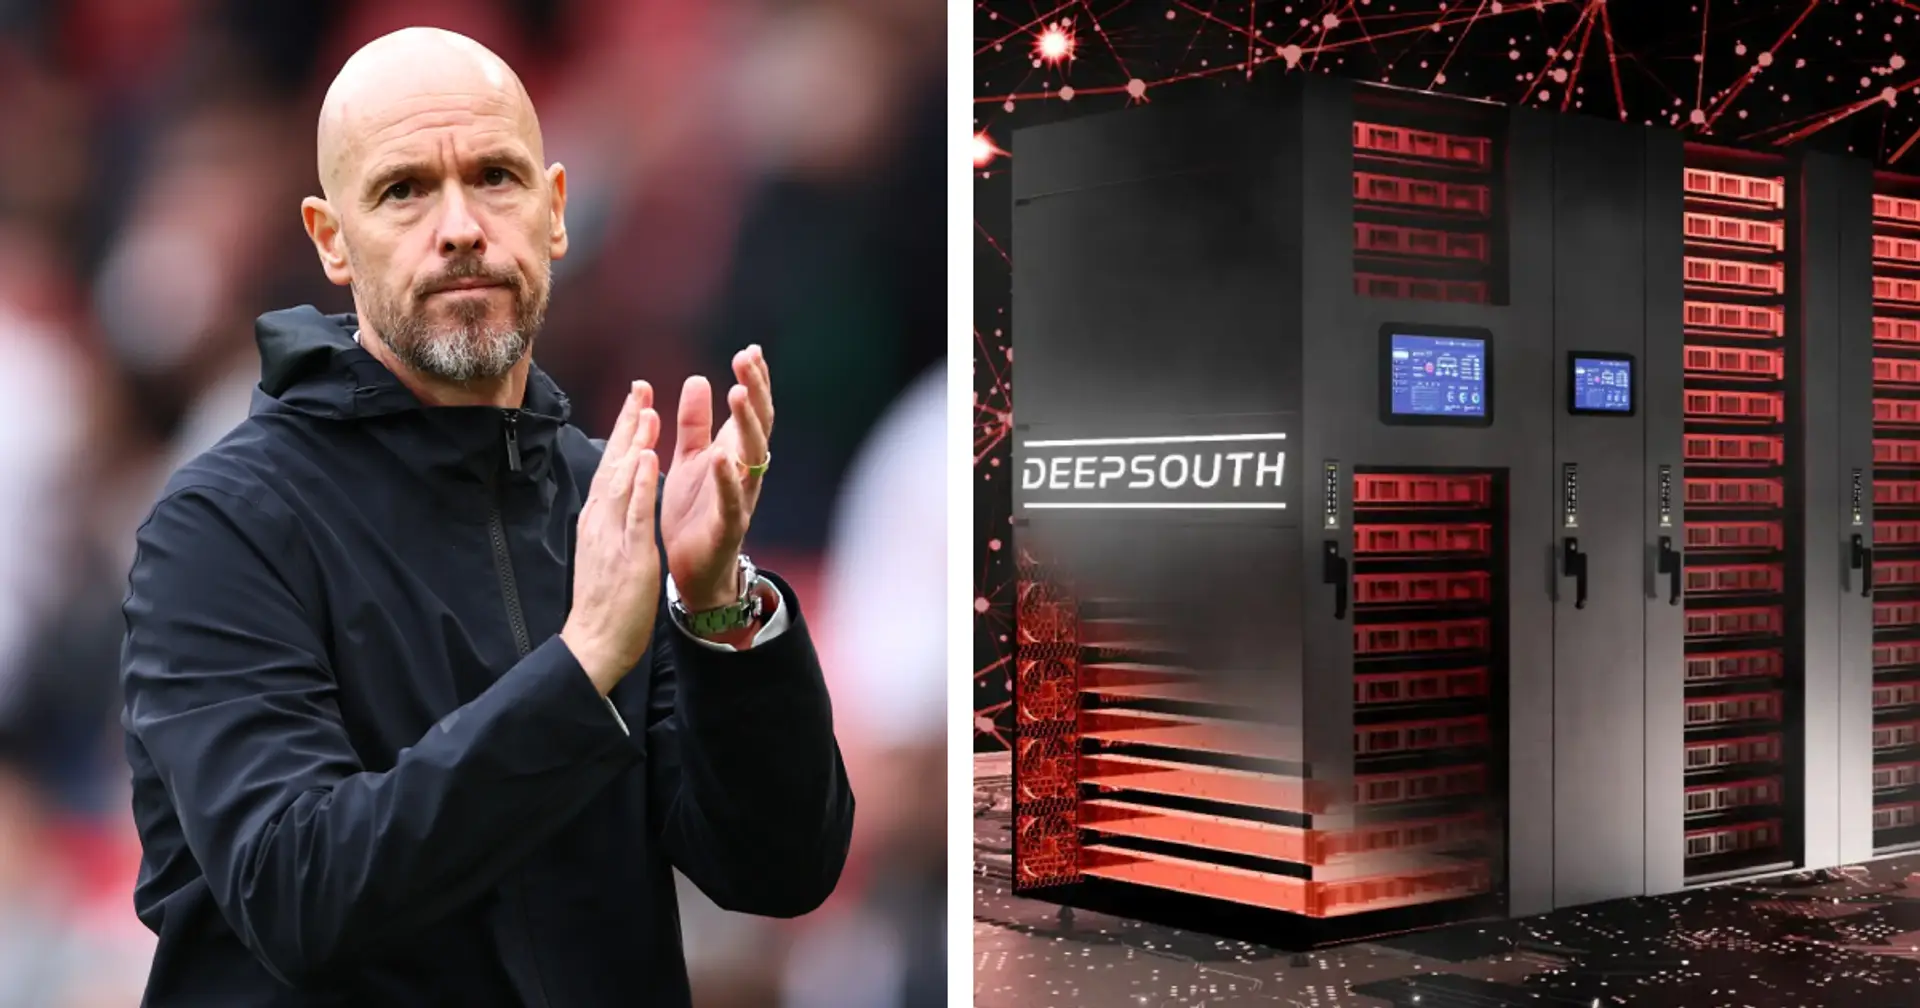 Supercomputer updates 2023/24 prediction and gives verdict on Man United's Champions League hopes